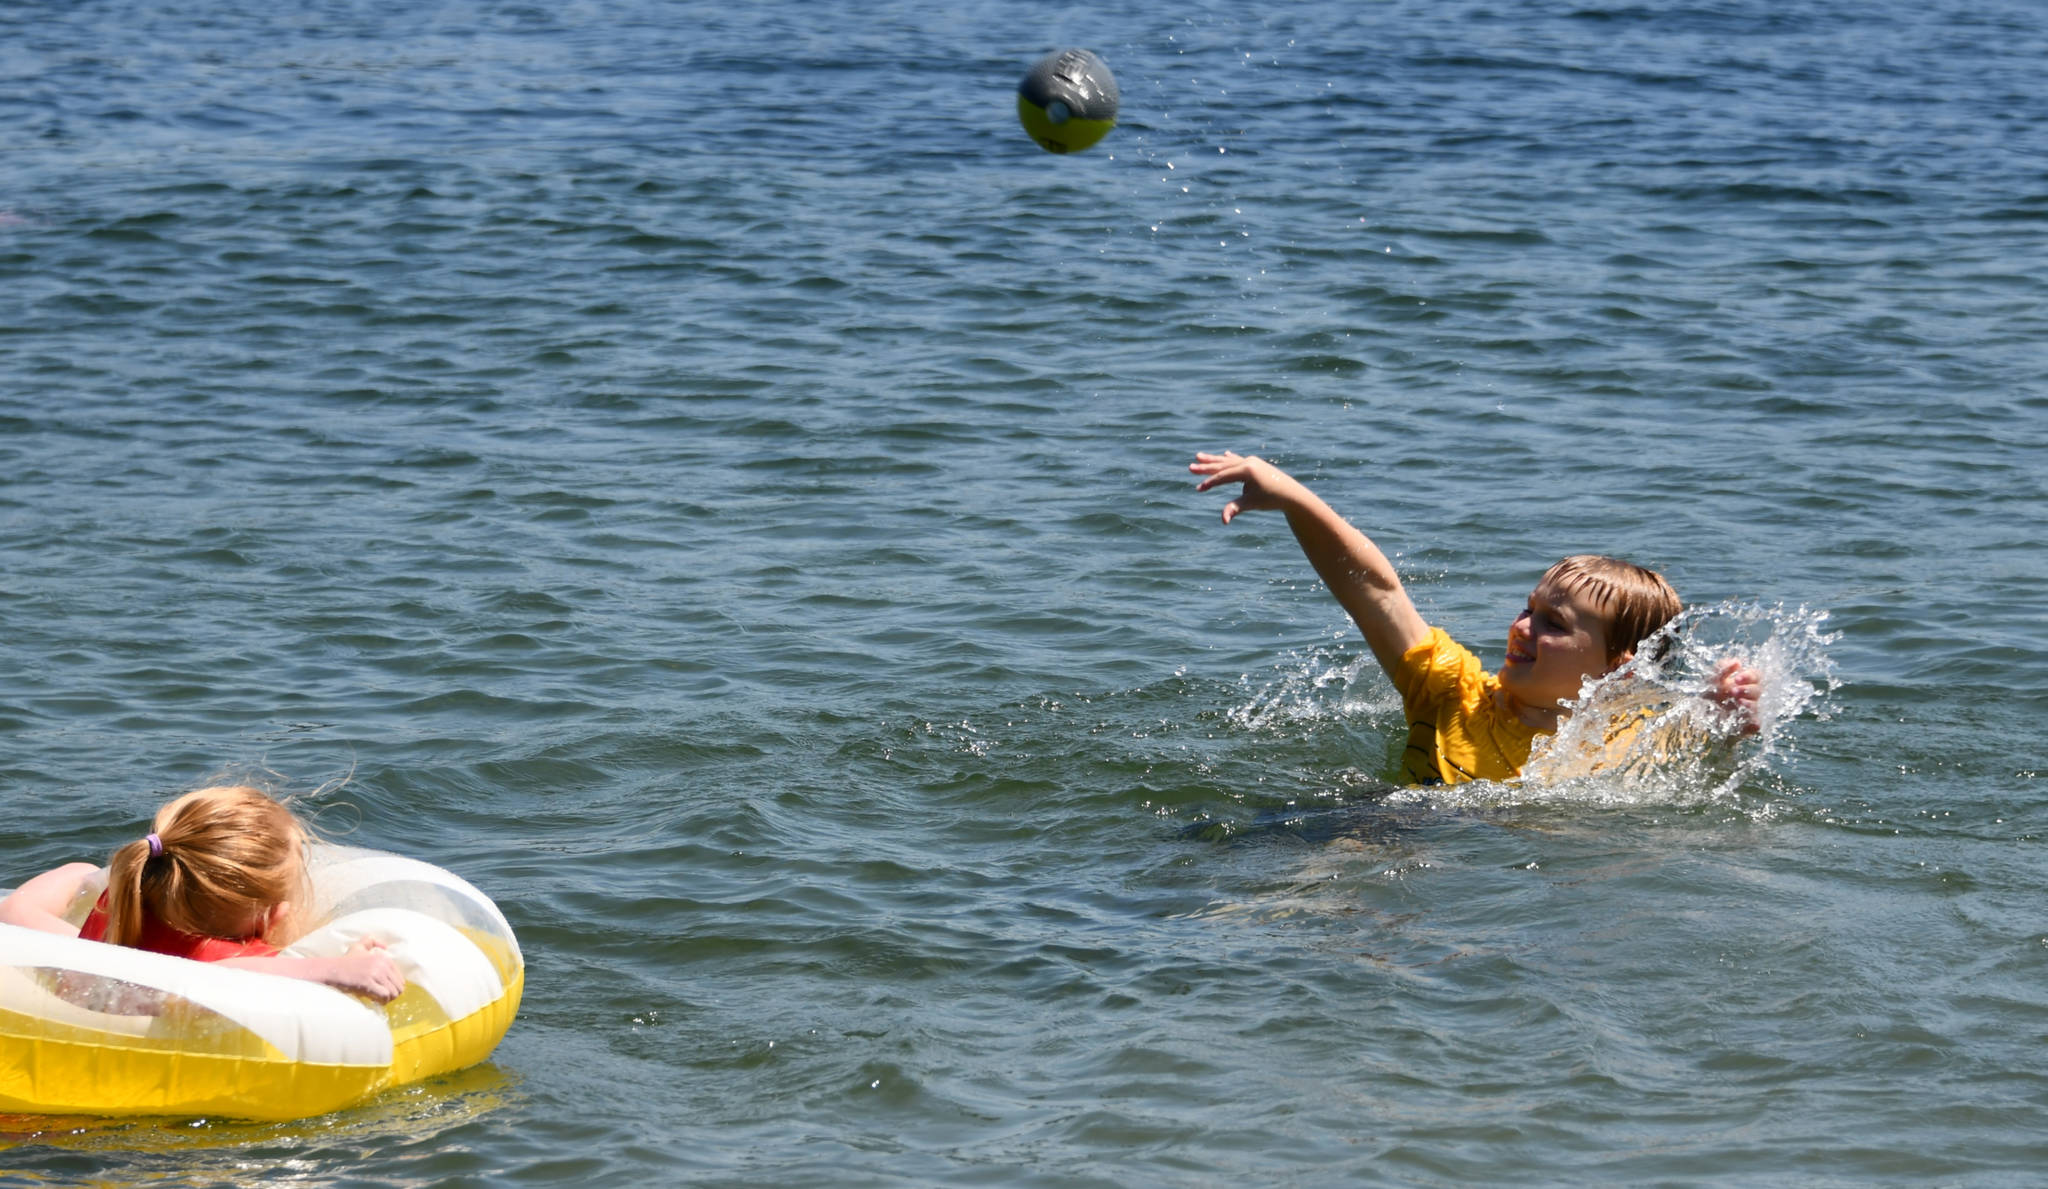 Rowan Ward tosses a football in Lake Washington off Luther Burbank Park on a sunny June 29. His sister Sienna watches. They were playing with their grandparents, Barb and Scott Middleton. Temperatures hit the mid- to upper-80s on this day, a far cry from the 100s on the previous days. Andy Nystrom/ staff photo